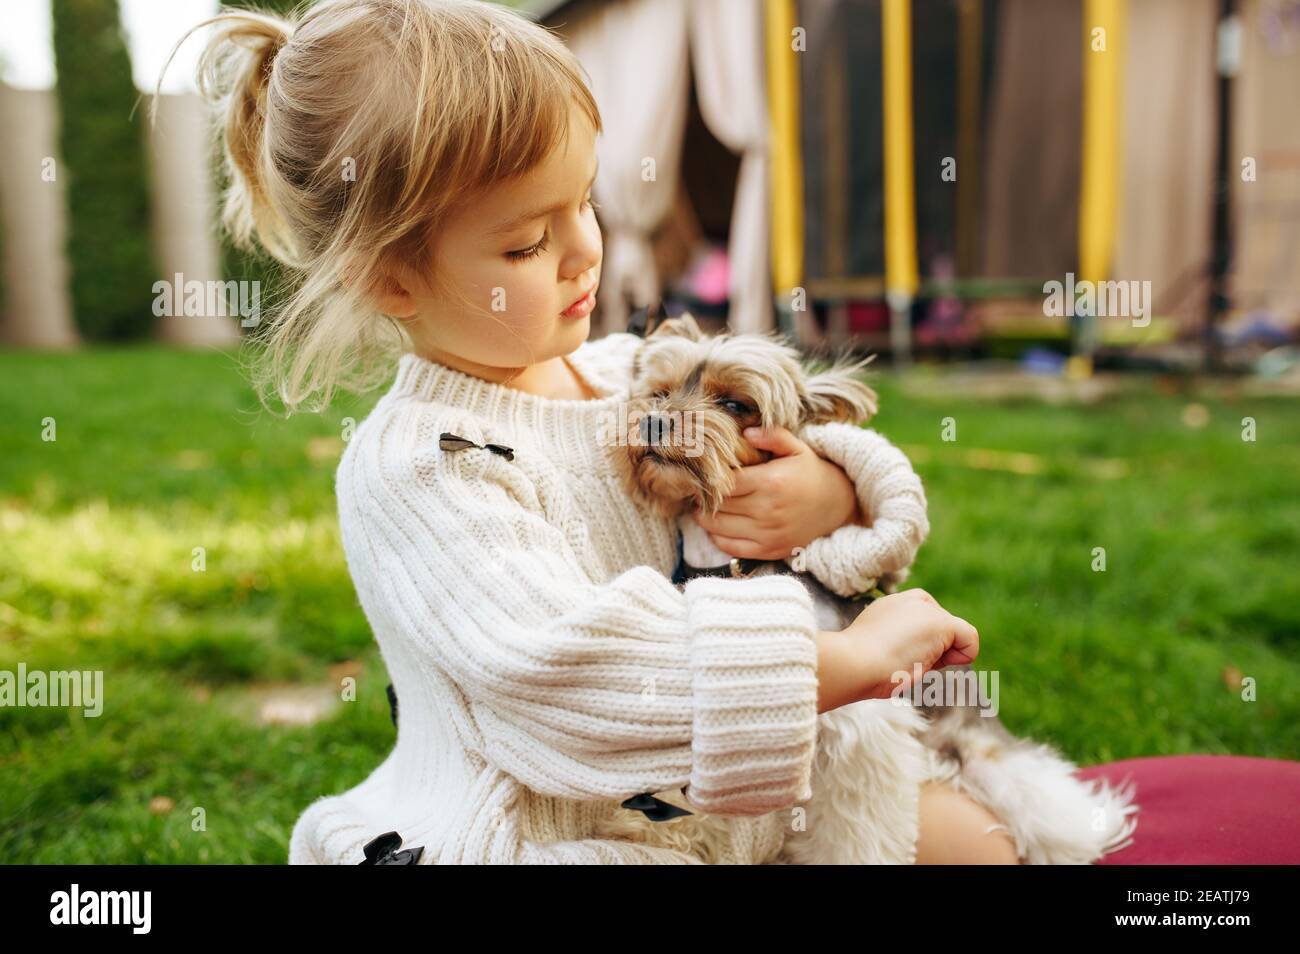 Kid embracing funny dog in the garden Stock Photo